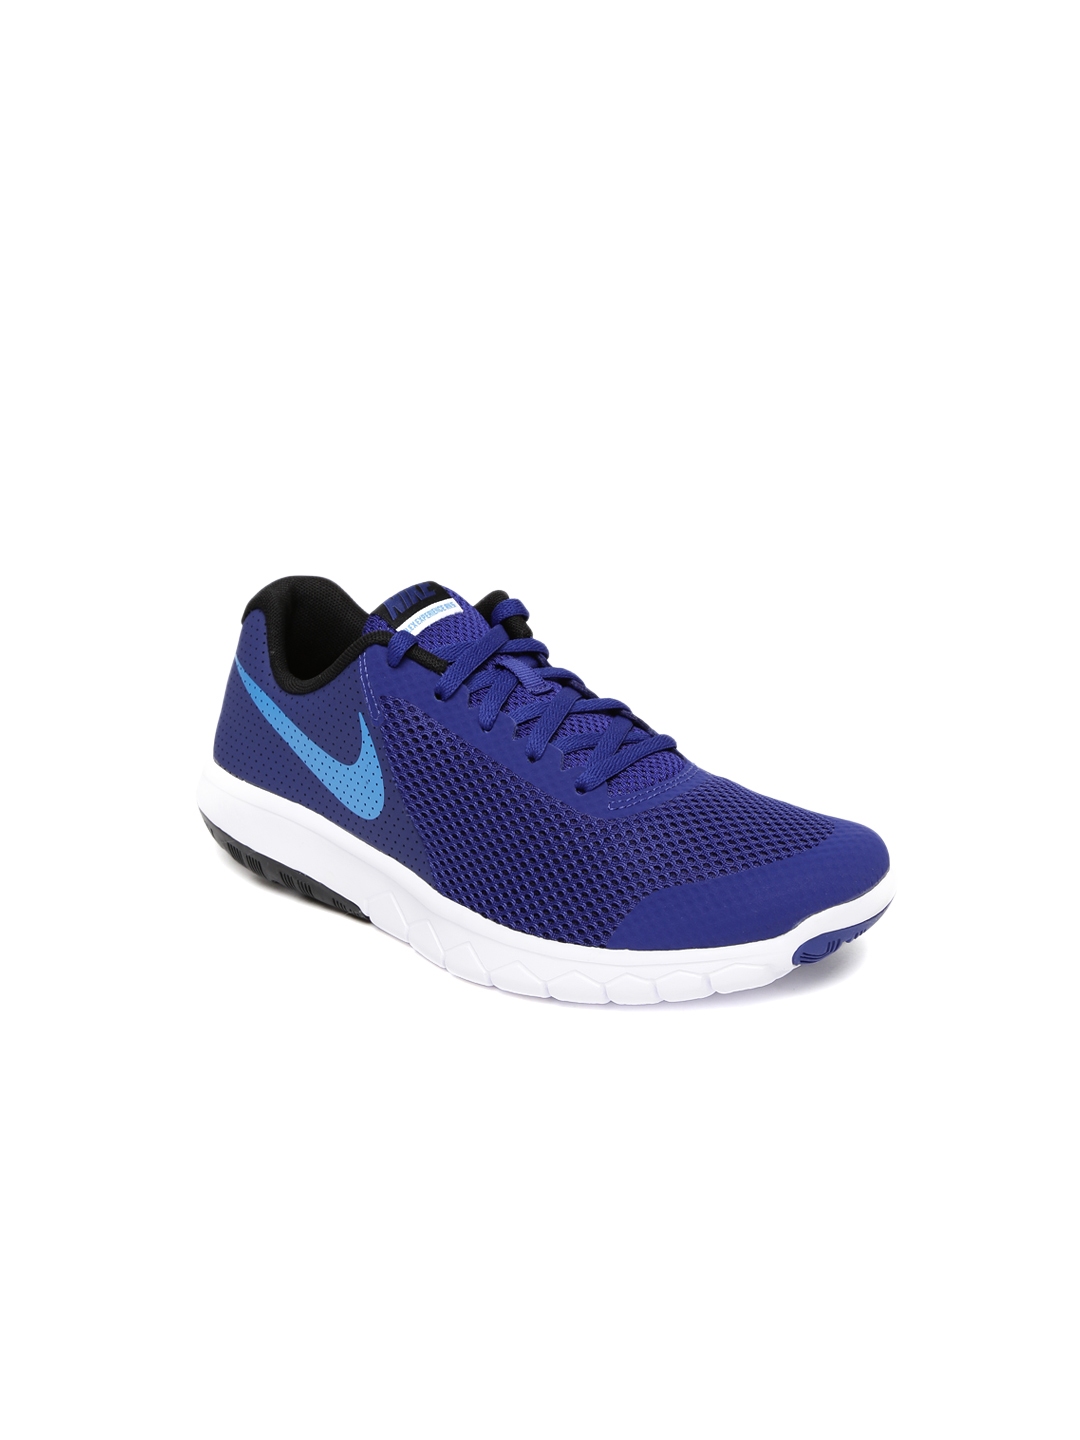 Buy Nike Boys Blue Flex Experience 5 Running Shoes - Sports Shoes for ...